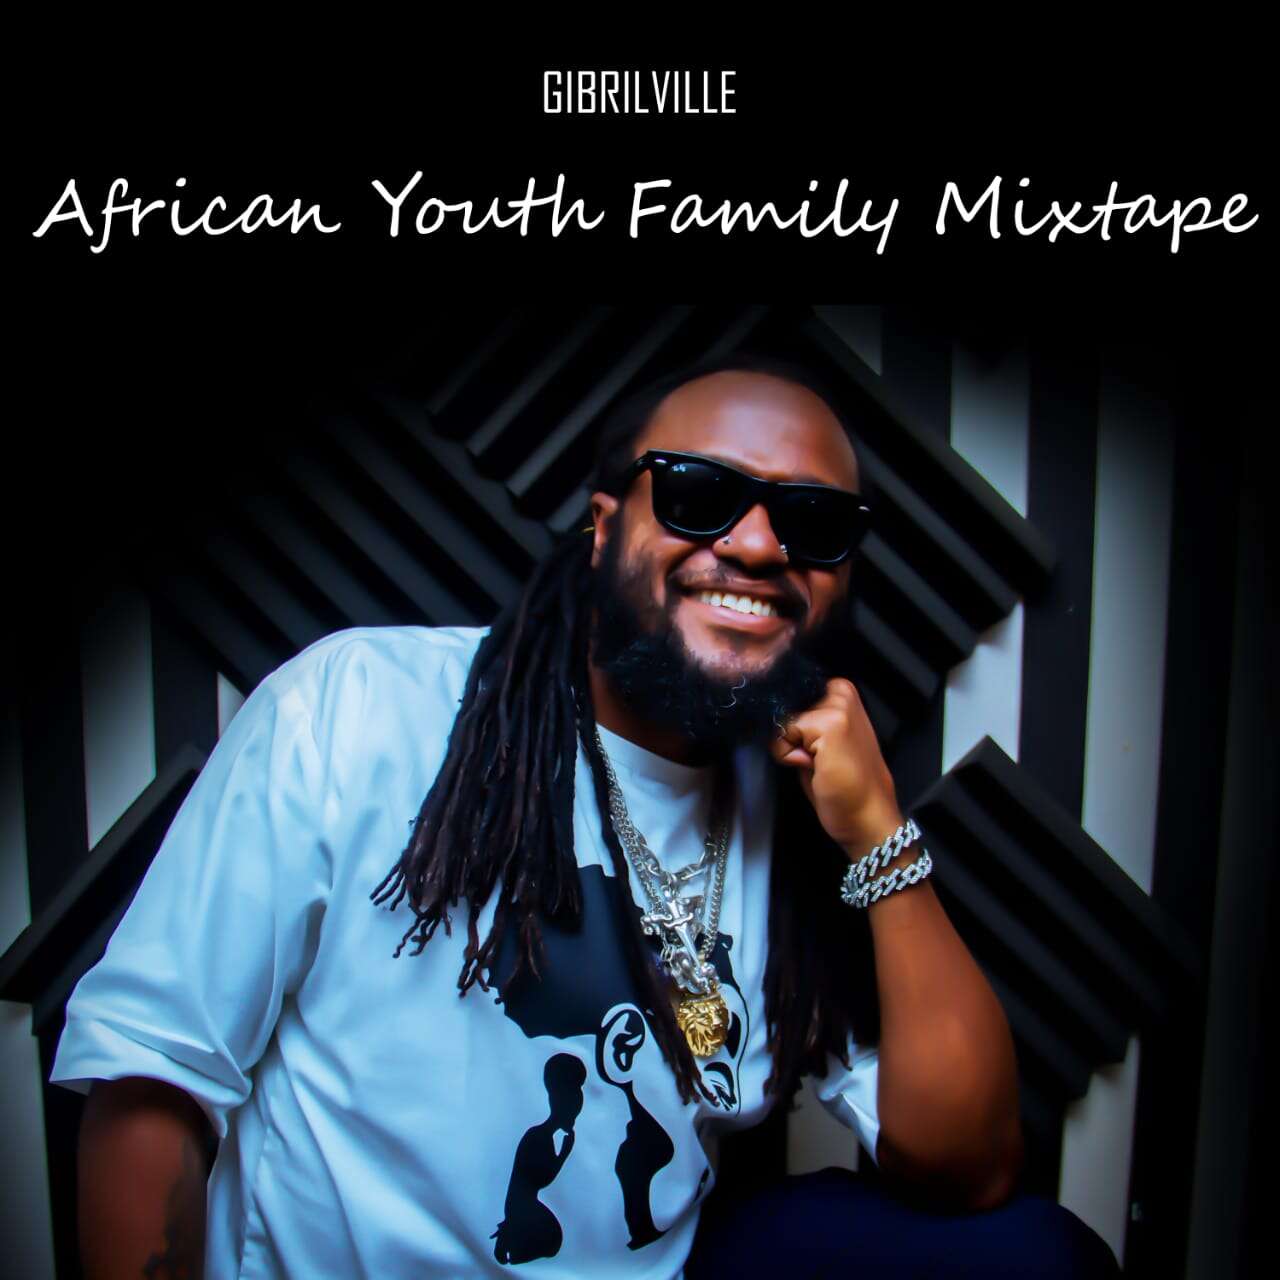 Gibrilville: The King of Melodies returns to his roots with "African Youth Family" mixtape